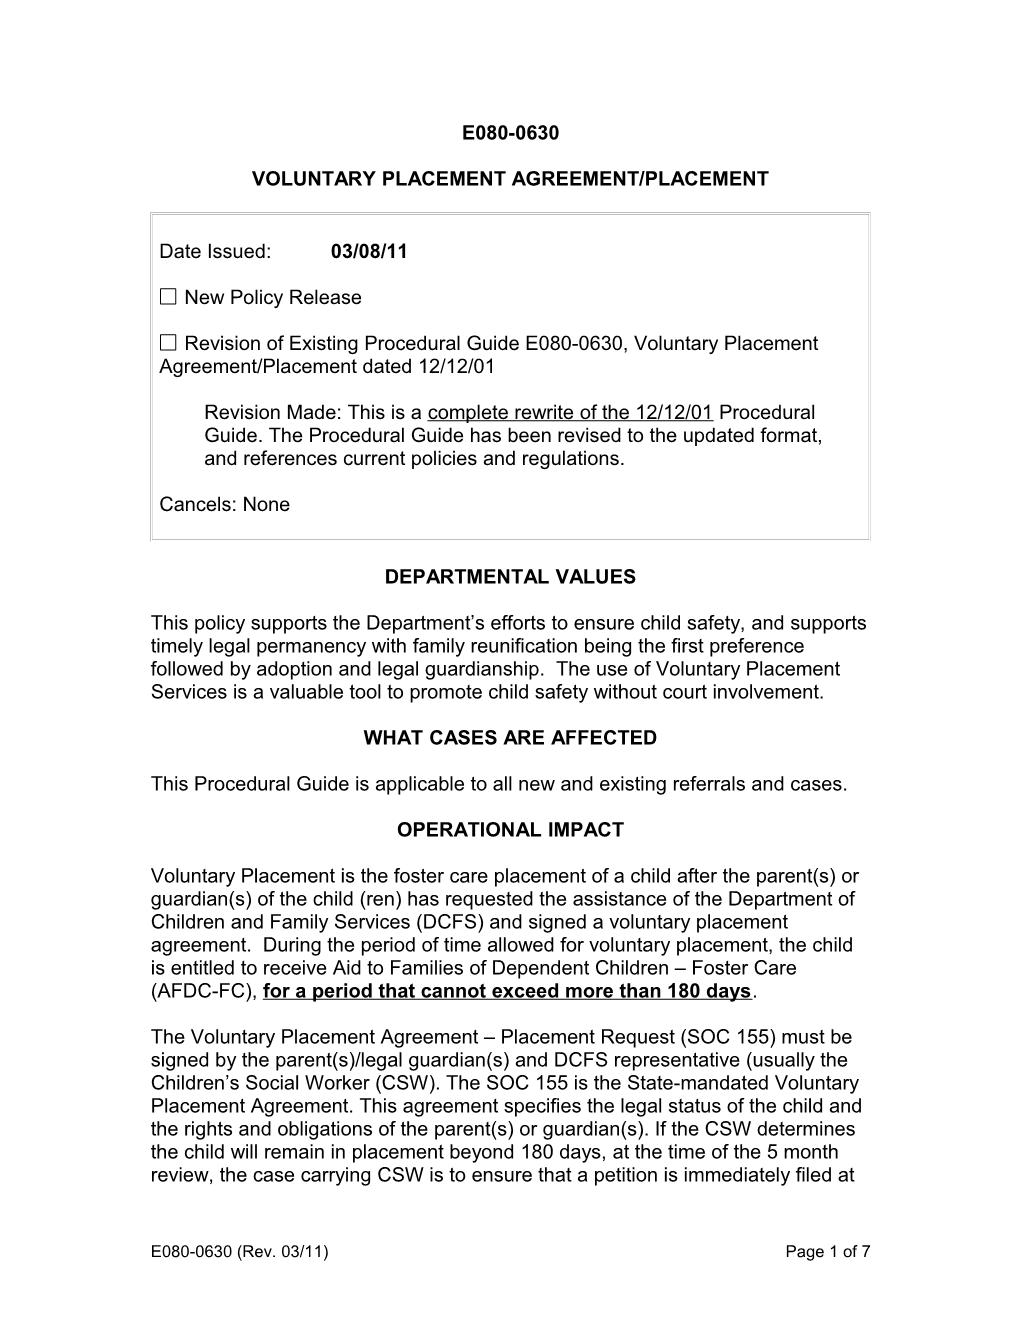 E080-0630, Voluntary Placement Agreement Placement